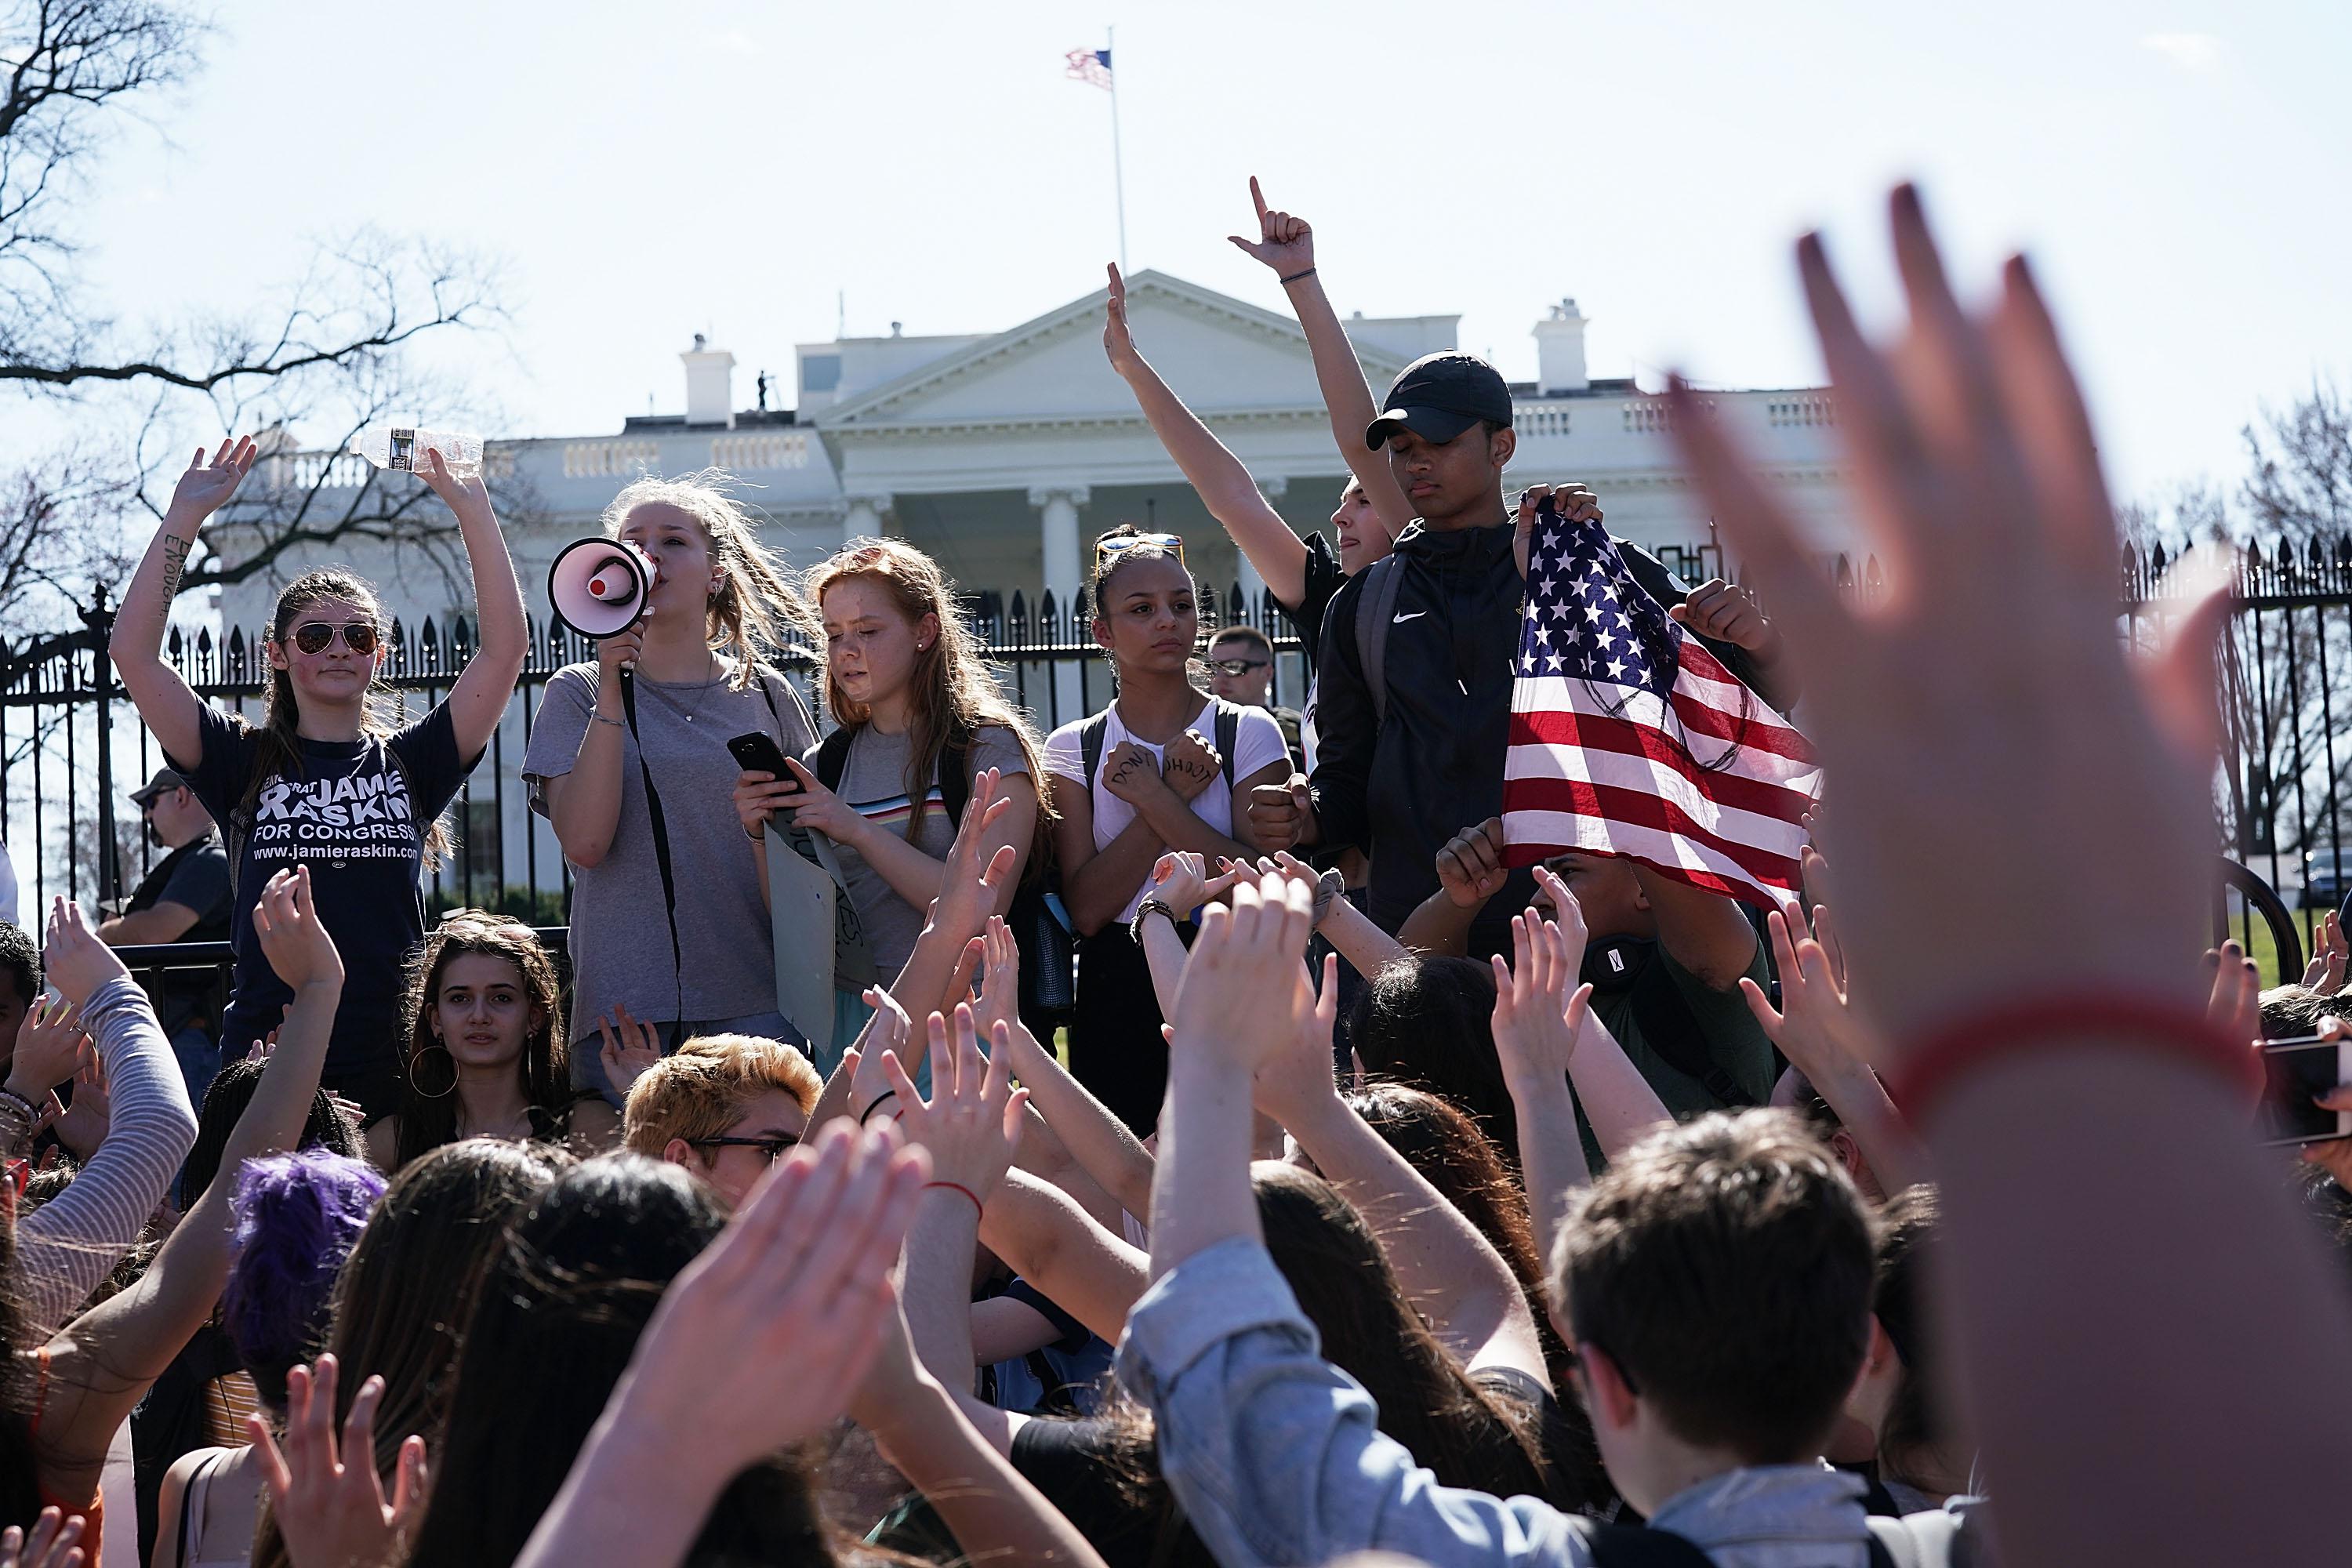 Students protest gun violence outside the White House.